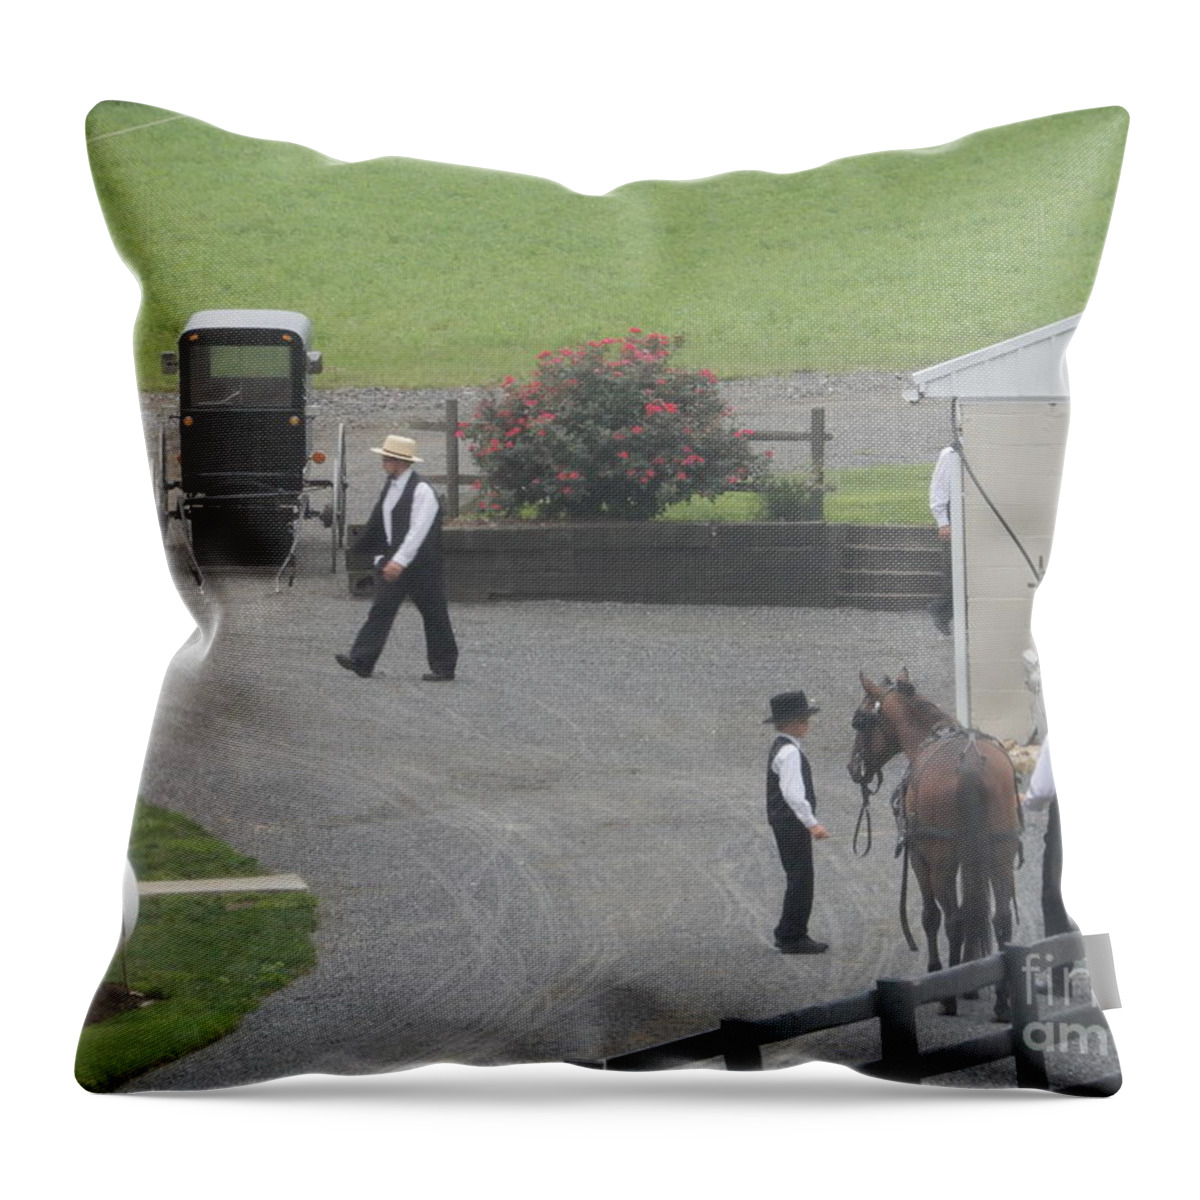 Amish Throw Pillow featuring the photograph Tending to a Horse Before Church by Christine Clark